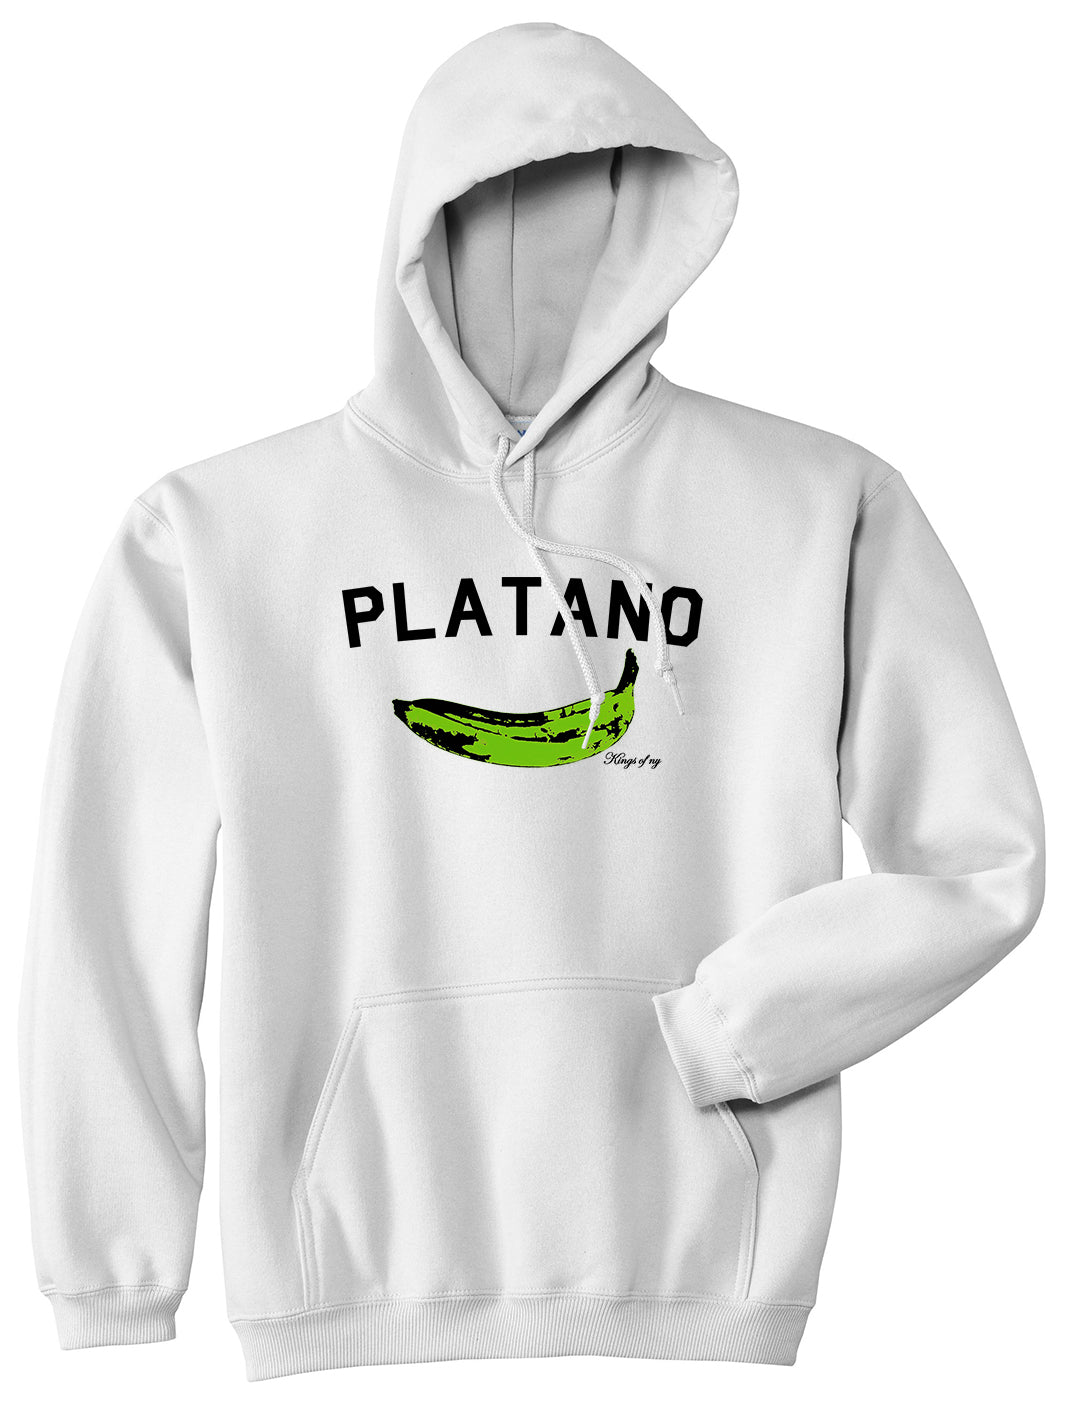 Platano Dominican Artwork DR Mens Pullover Hoodie White